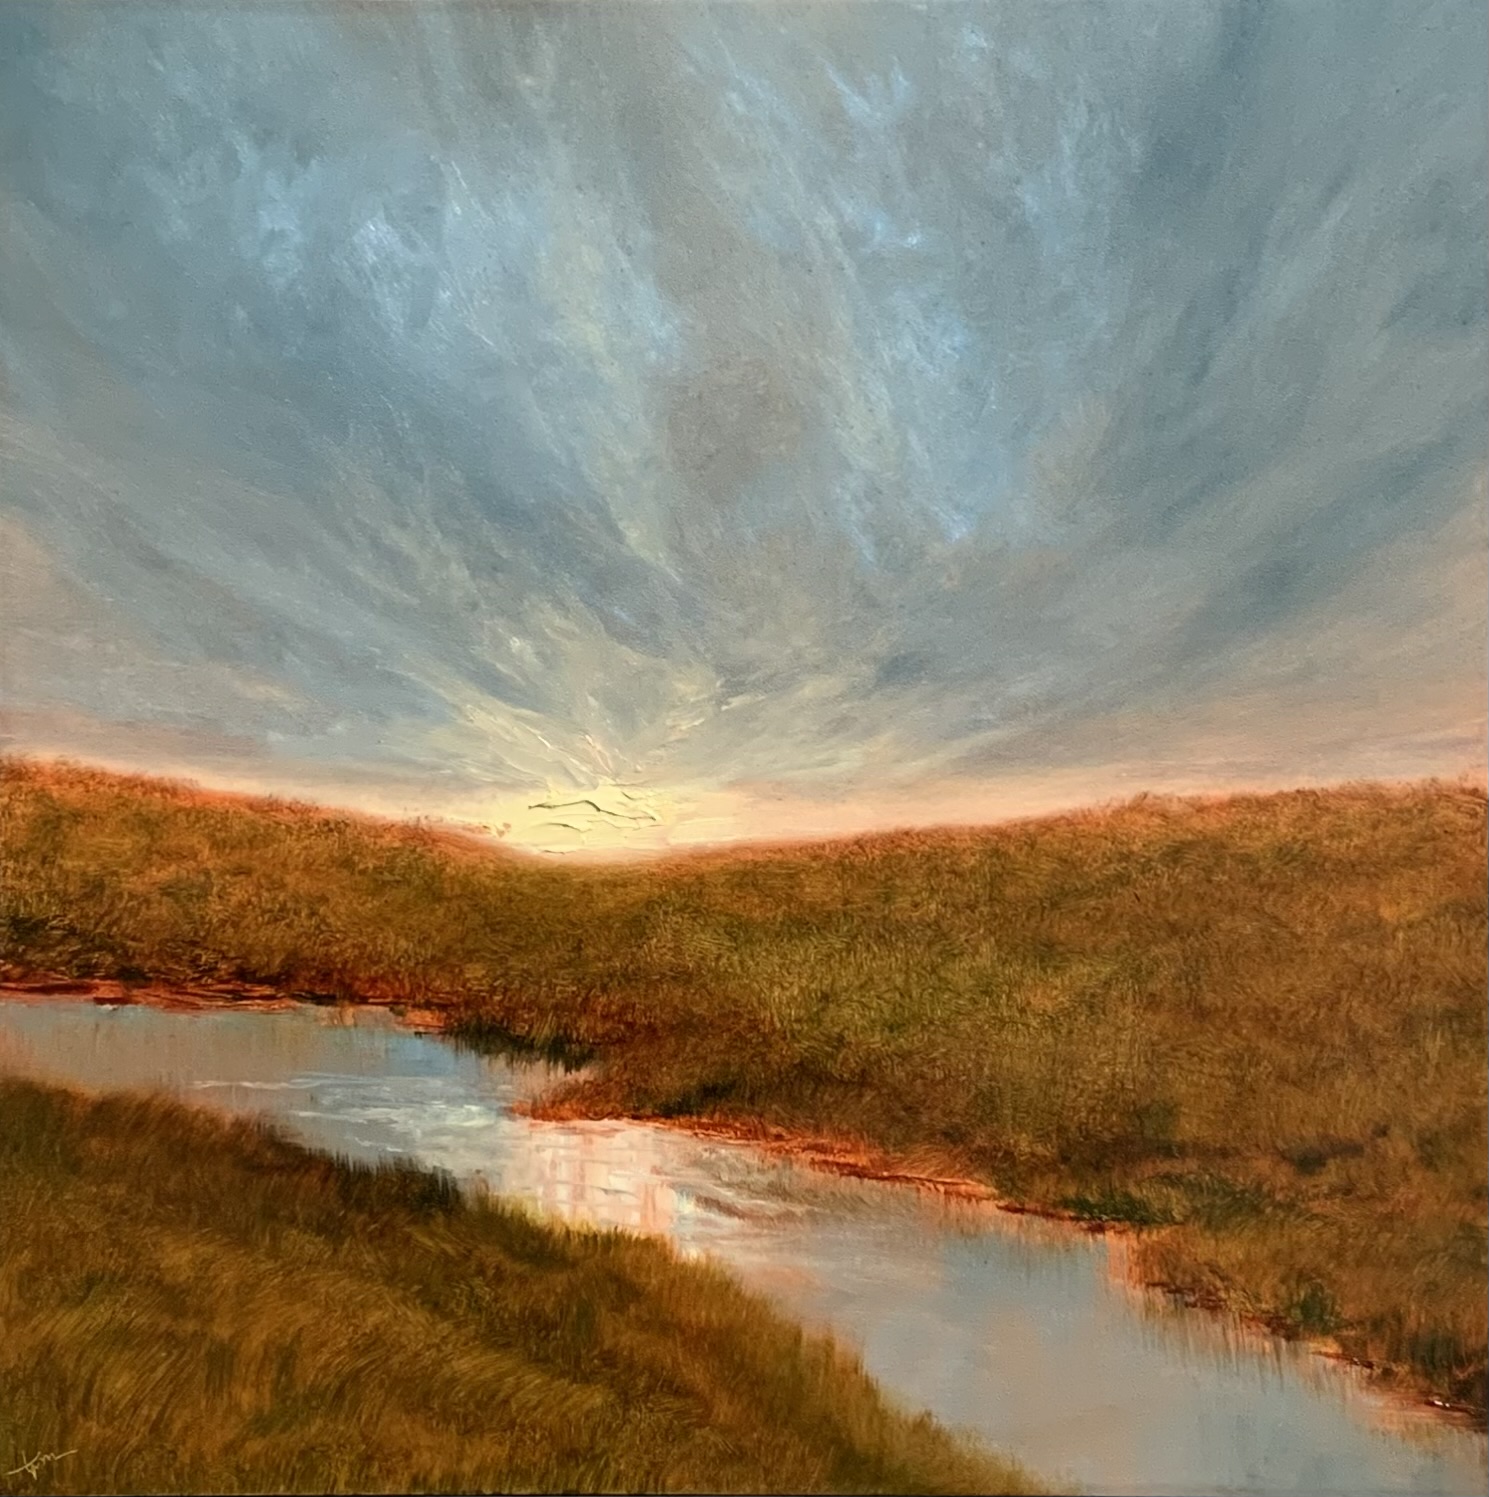 Original landscape oil painting by Tisha Mark, In-Between Times (Week 10, 52 Weeks of Finding Light Series), 12"x12" oil on cradled gessobord (2023). Painting shows a sun rising over a hillside and reflecting in a creek. The sky has dramatic grayish-blue cloud formations with orange undertones, the earth features textured grass also with orange undertones.